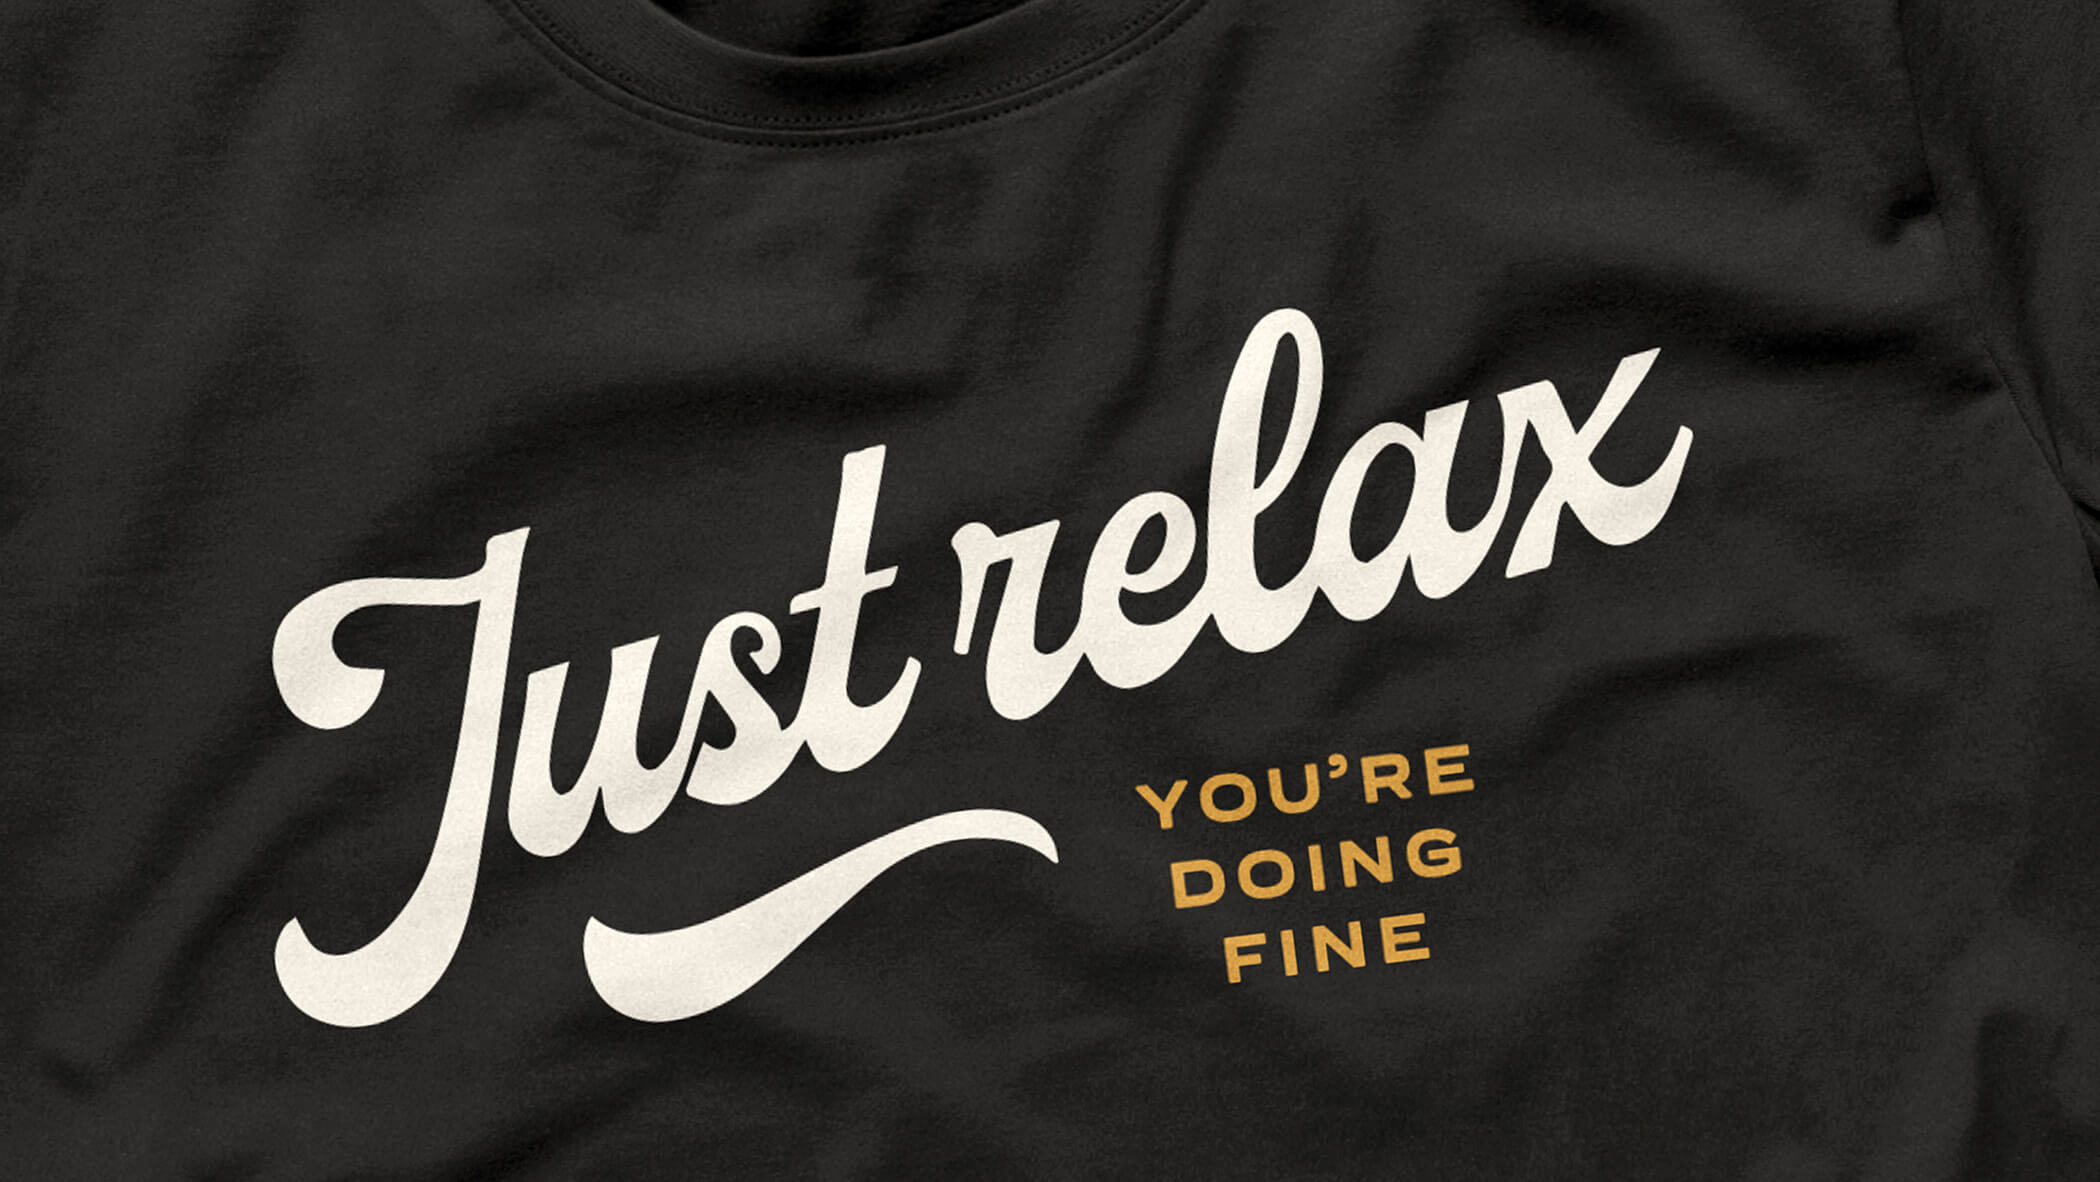 Just relax you're doing fine t-shirt